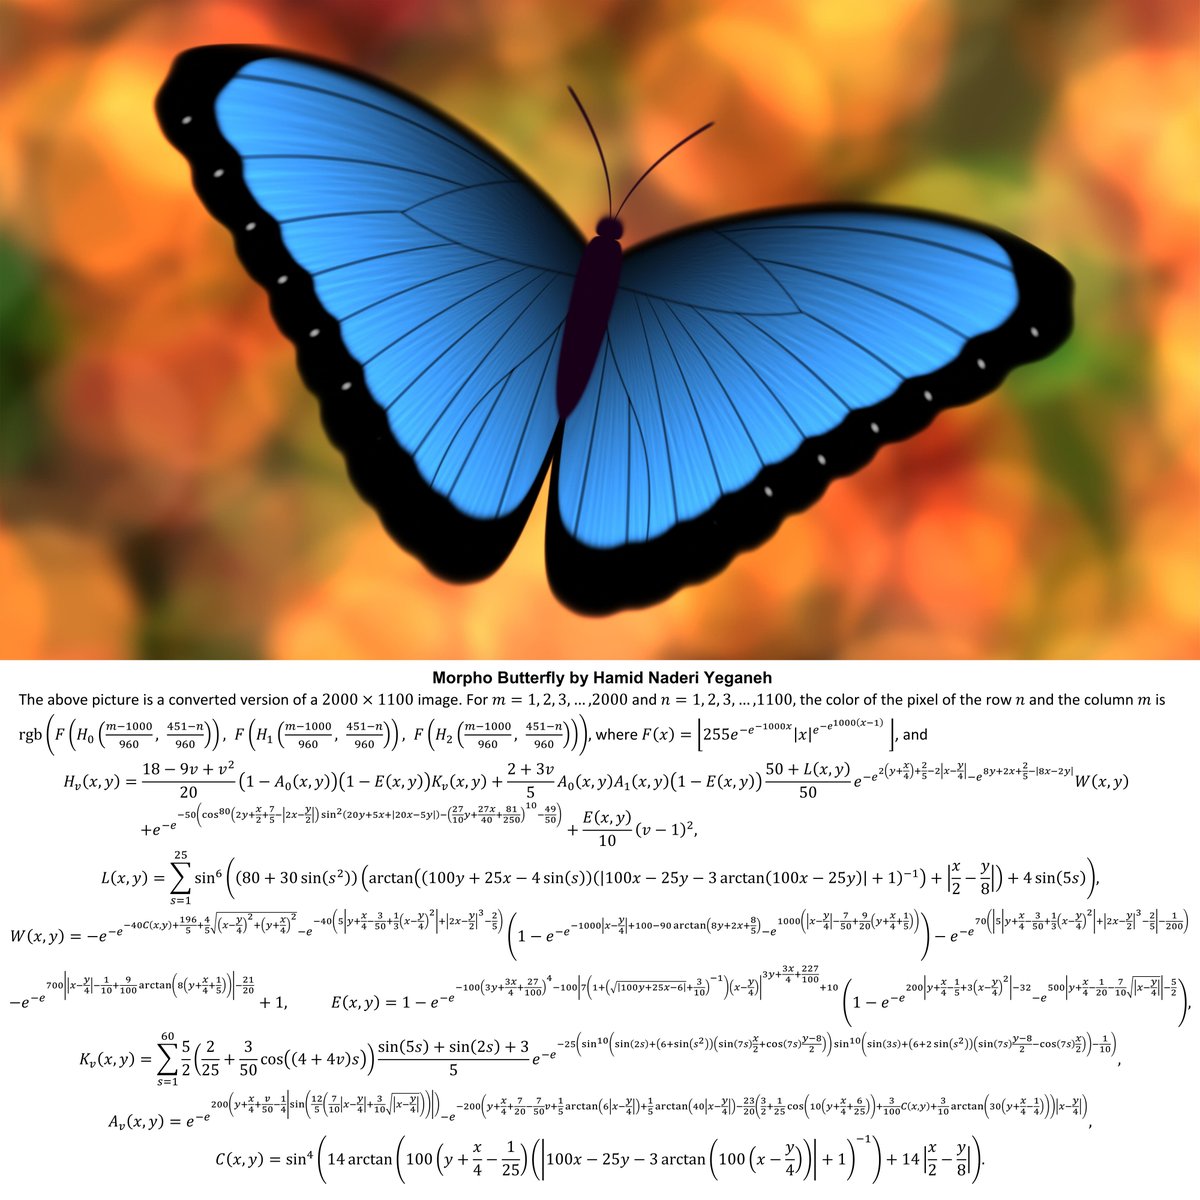 I drew this morpho butterfly with mathematical equations.